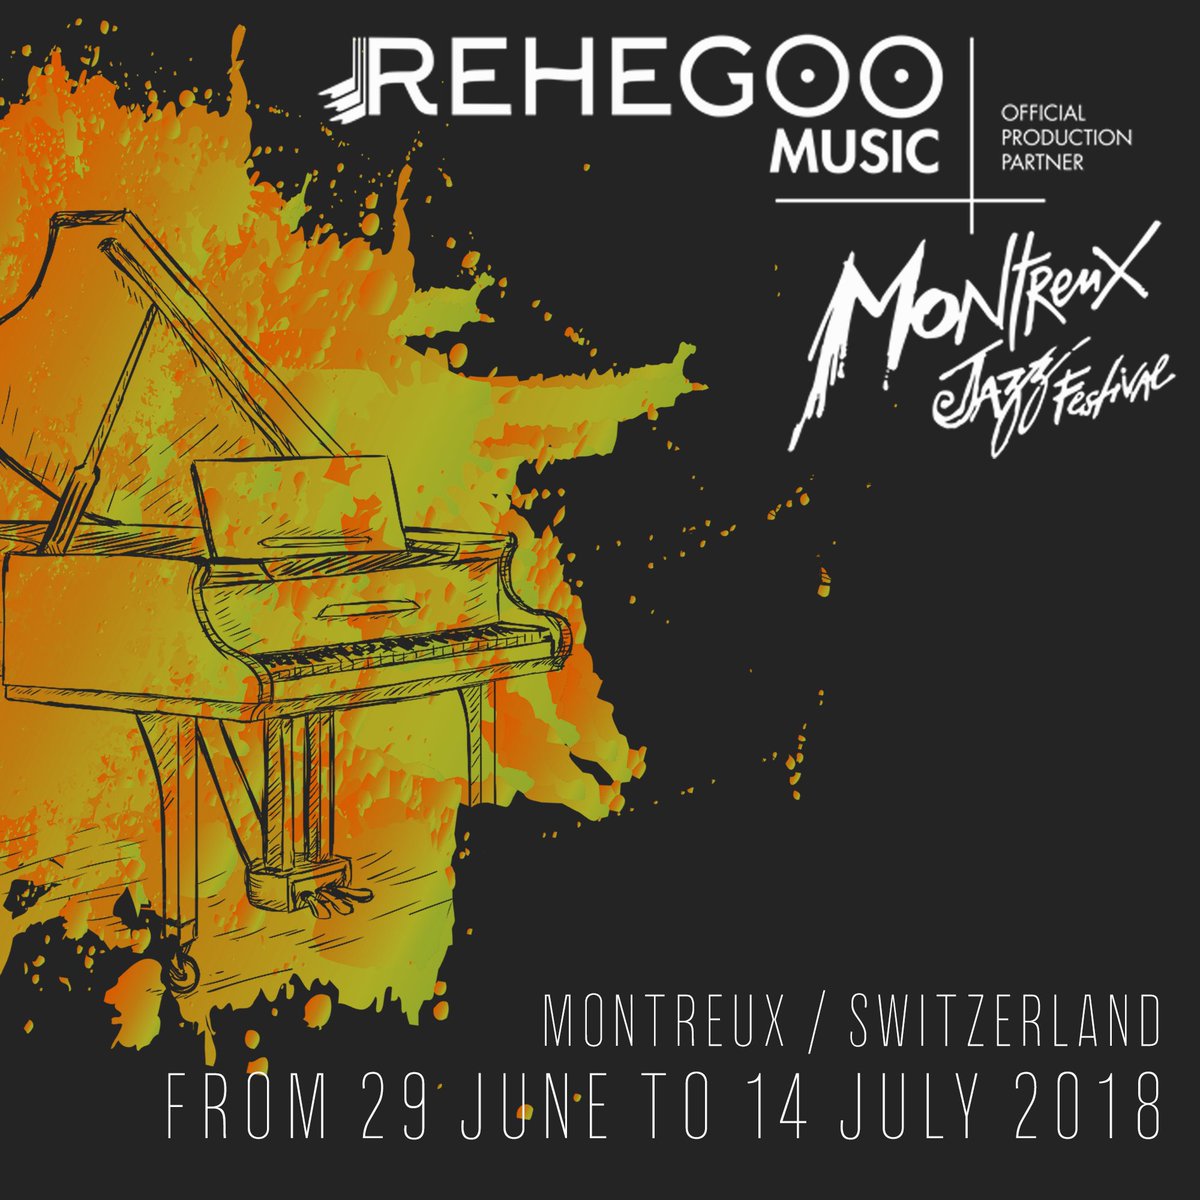 52nd Montreux Jazz Festival starts June 29th! We're going there – do you? 
Are you an #artist, who would like to seize opportunity in #musicindustry? Let's have a chat! 

See you there! montreuxjazz.com
#MJF18 @MontreuxJazz #musicfestival #festival #MontreuxJazzFestival